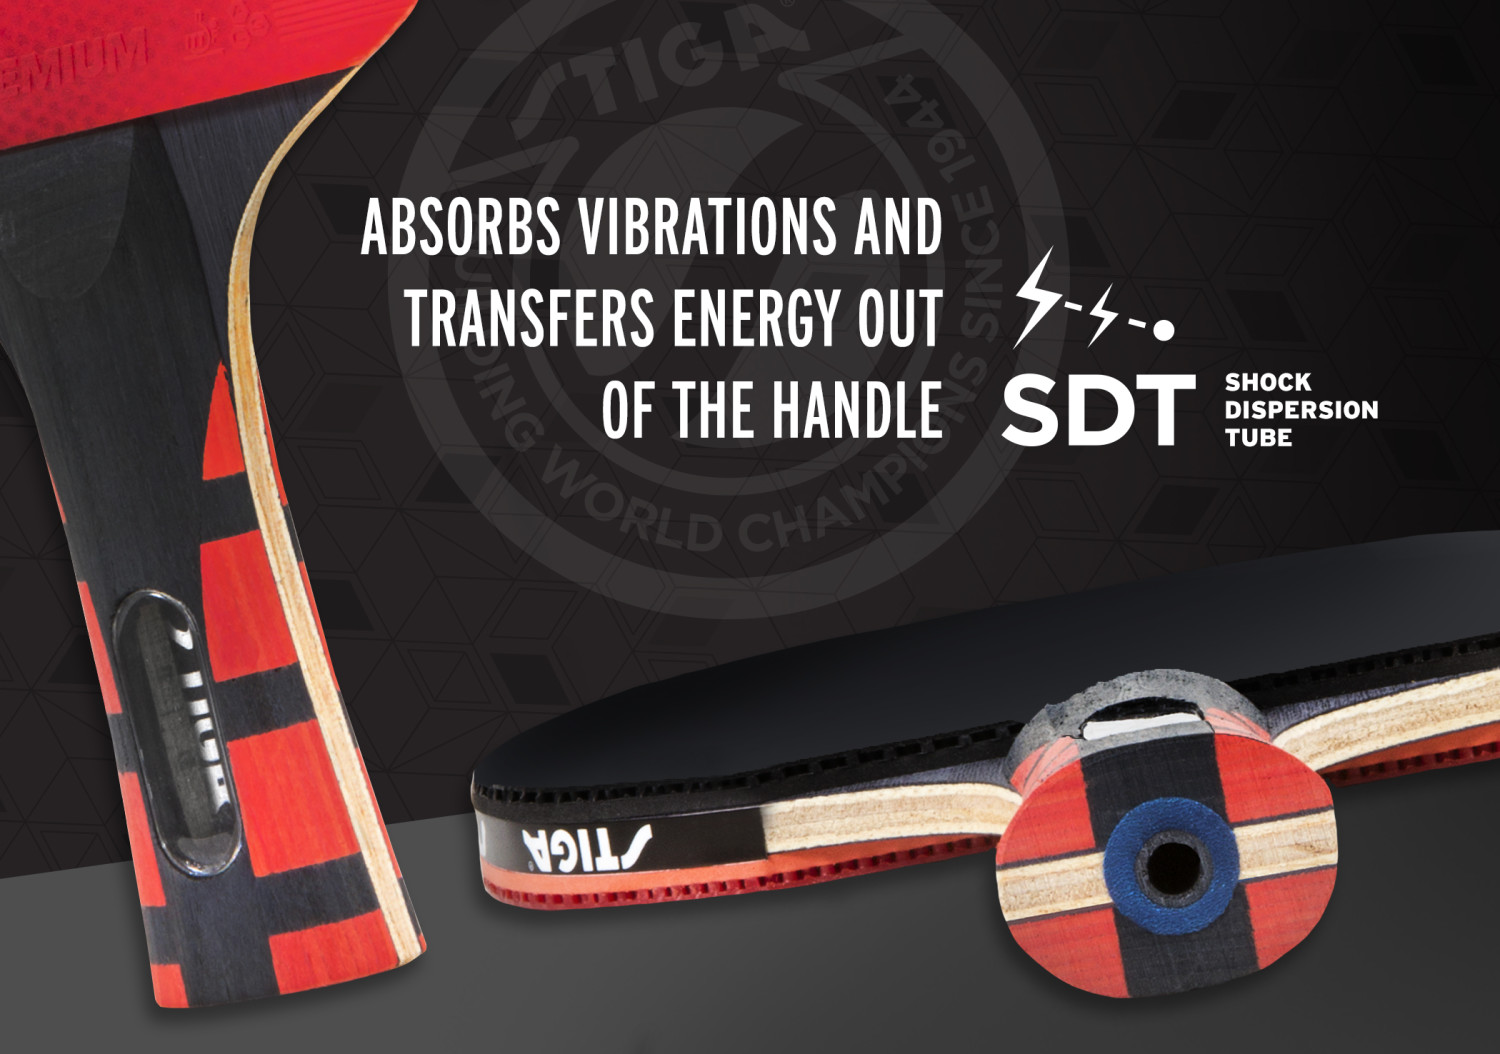 STIGA Evolution Performance-Level Table Tennis Racket Made with Approved Rubber for Tournament Play - image 4 of 15